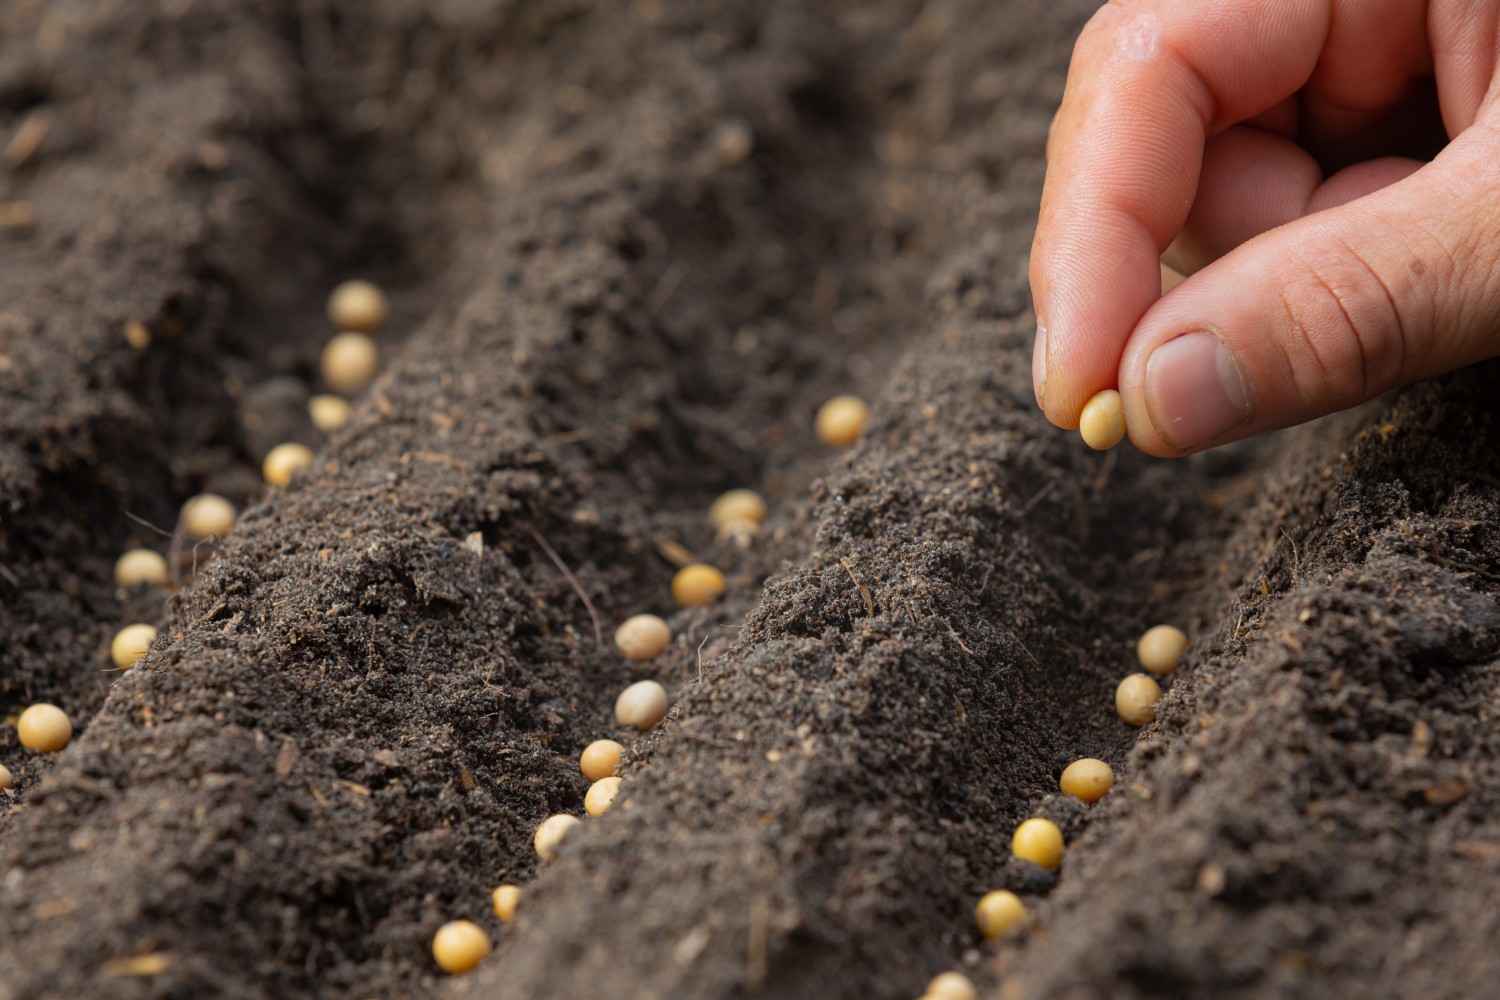 The Russian Government Plans to Restrict the Import of Foreign Seeds